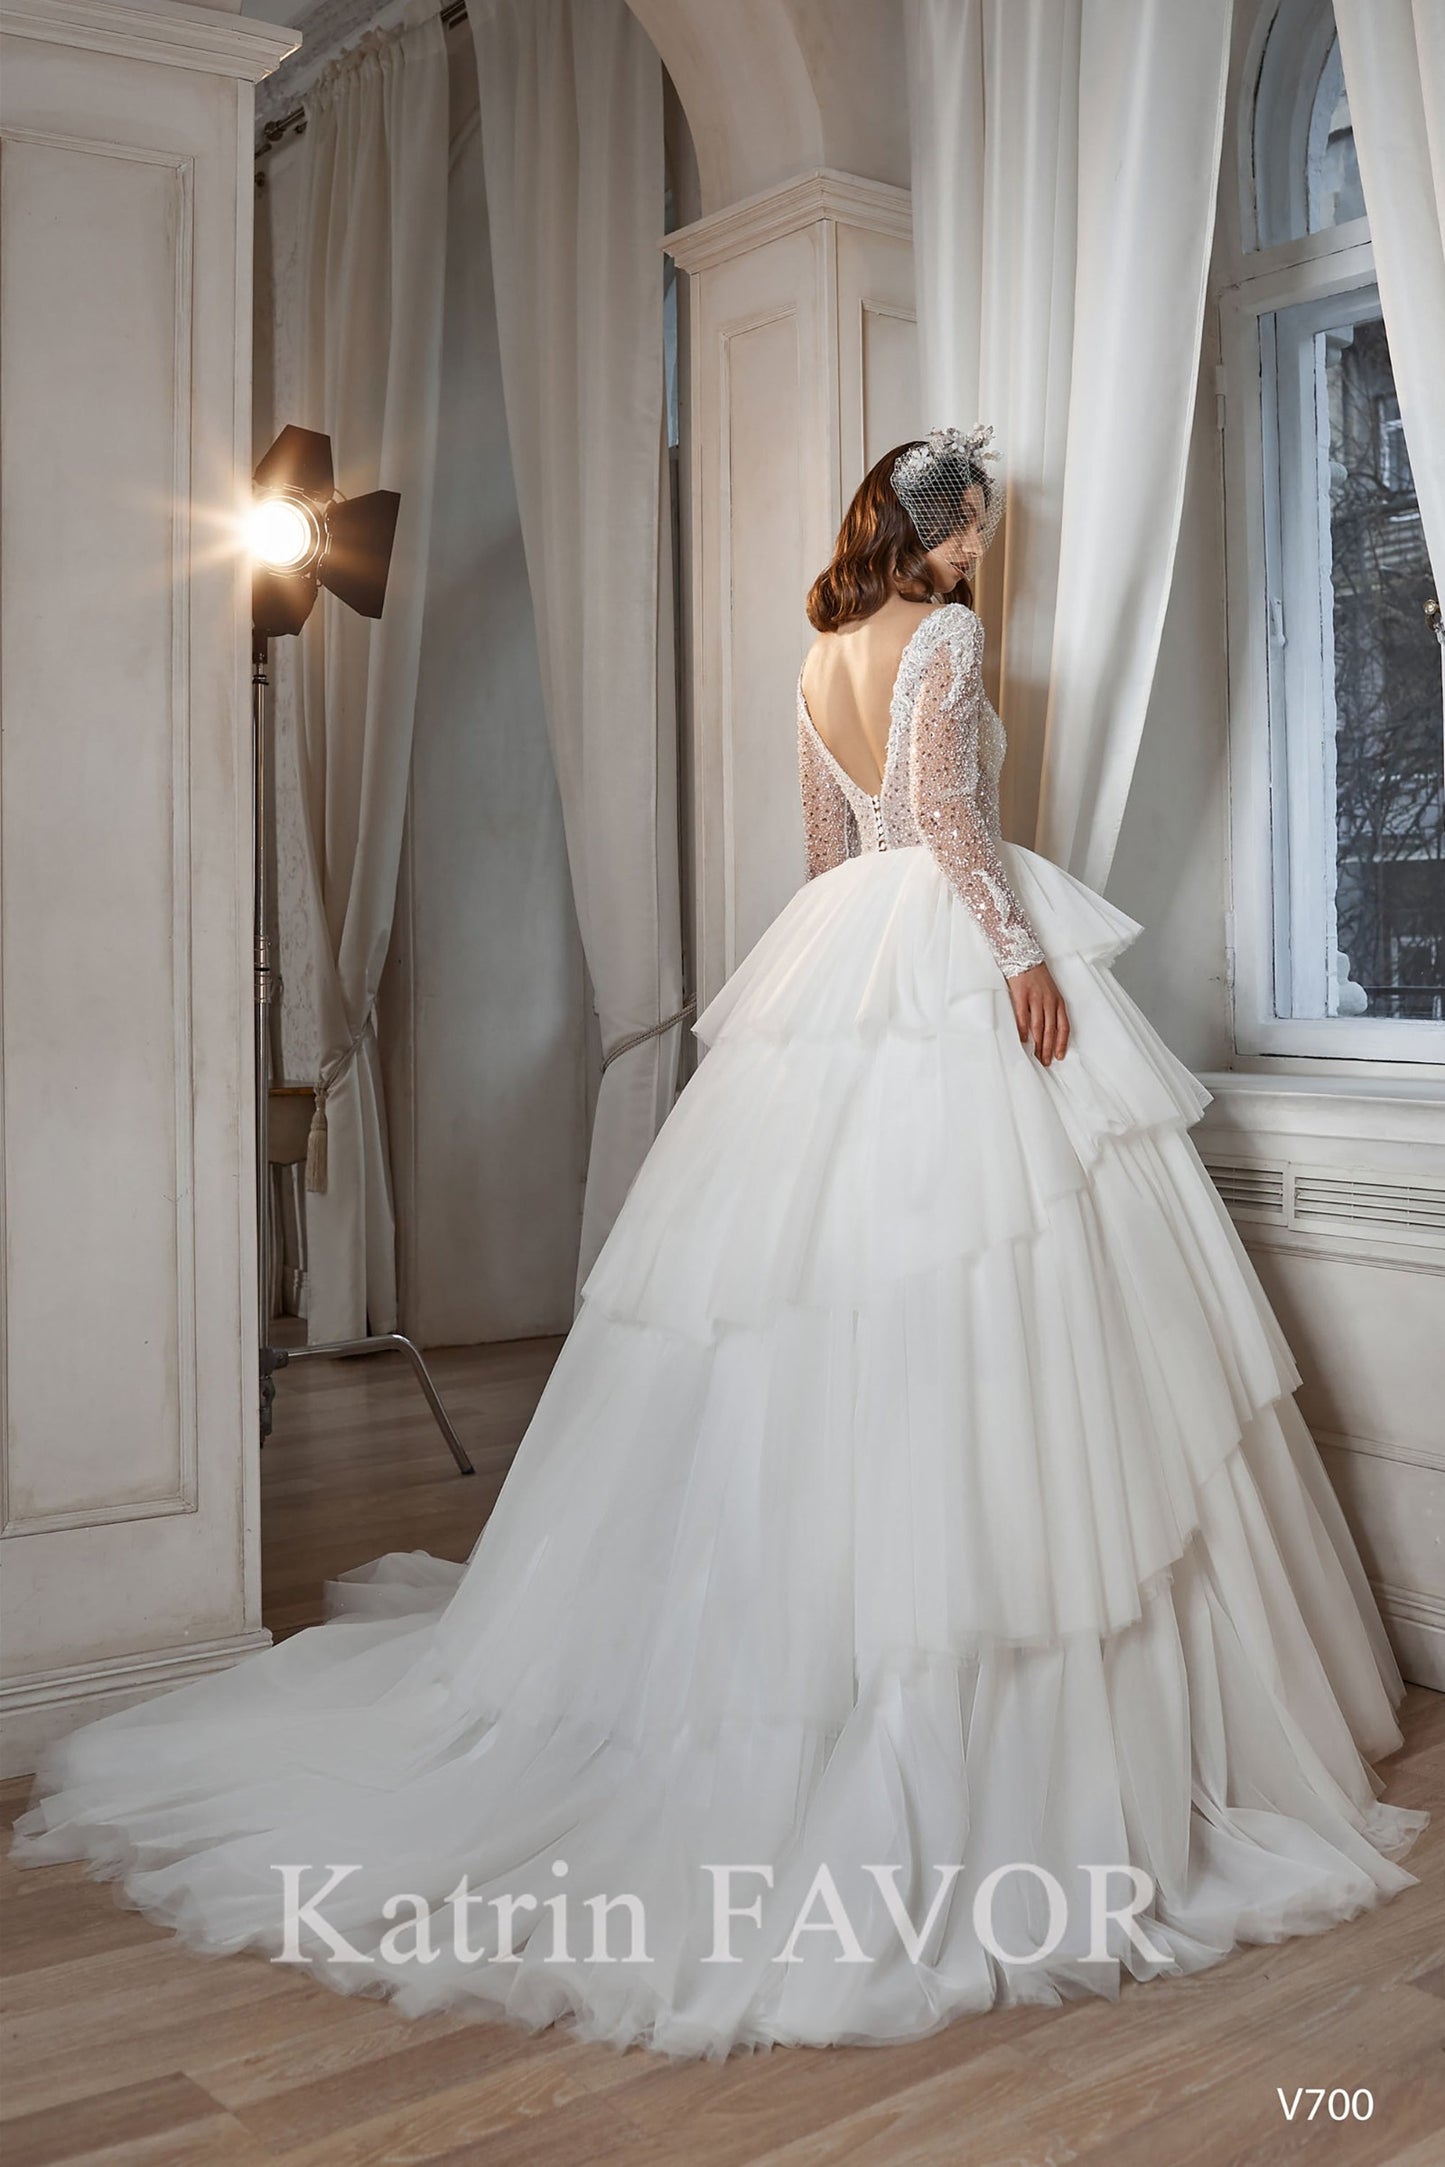 KatrinFAVORboutique-Princess ball gown wedding dress with long sleeves